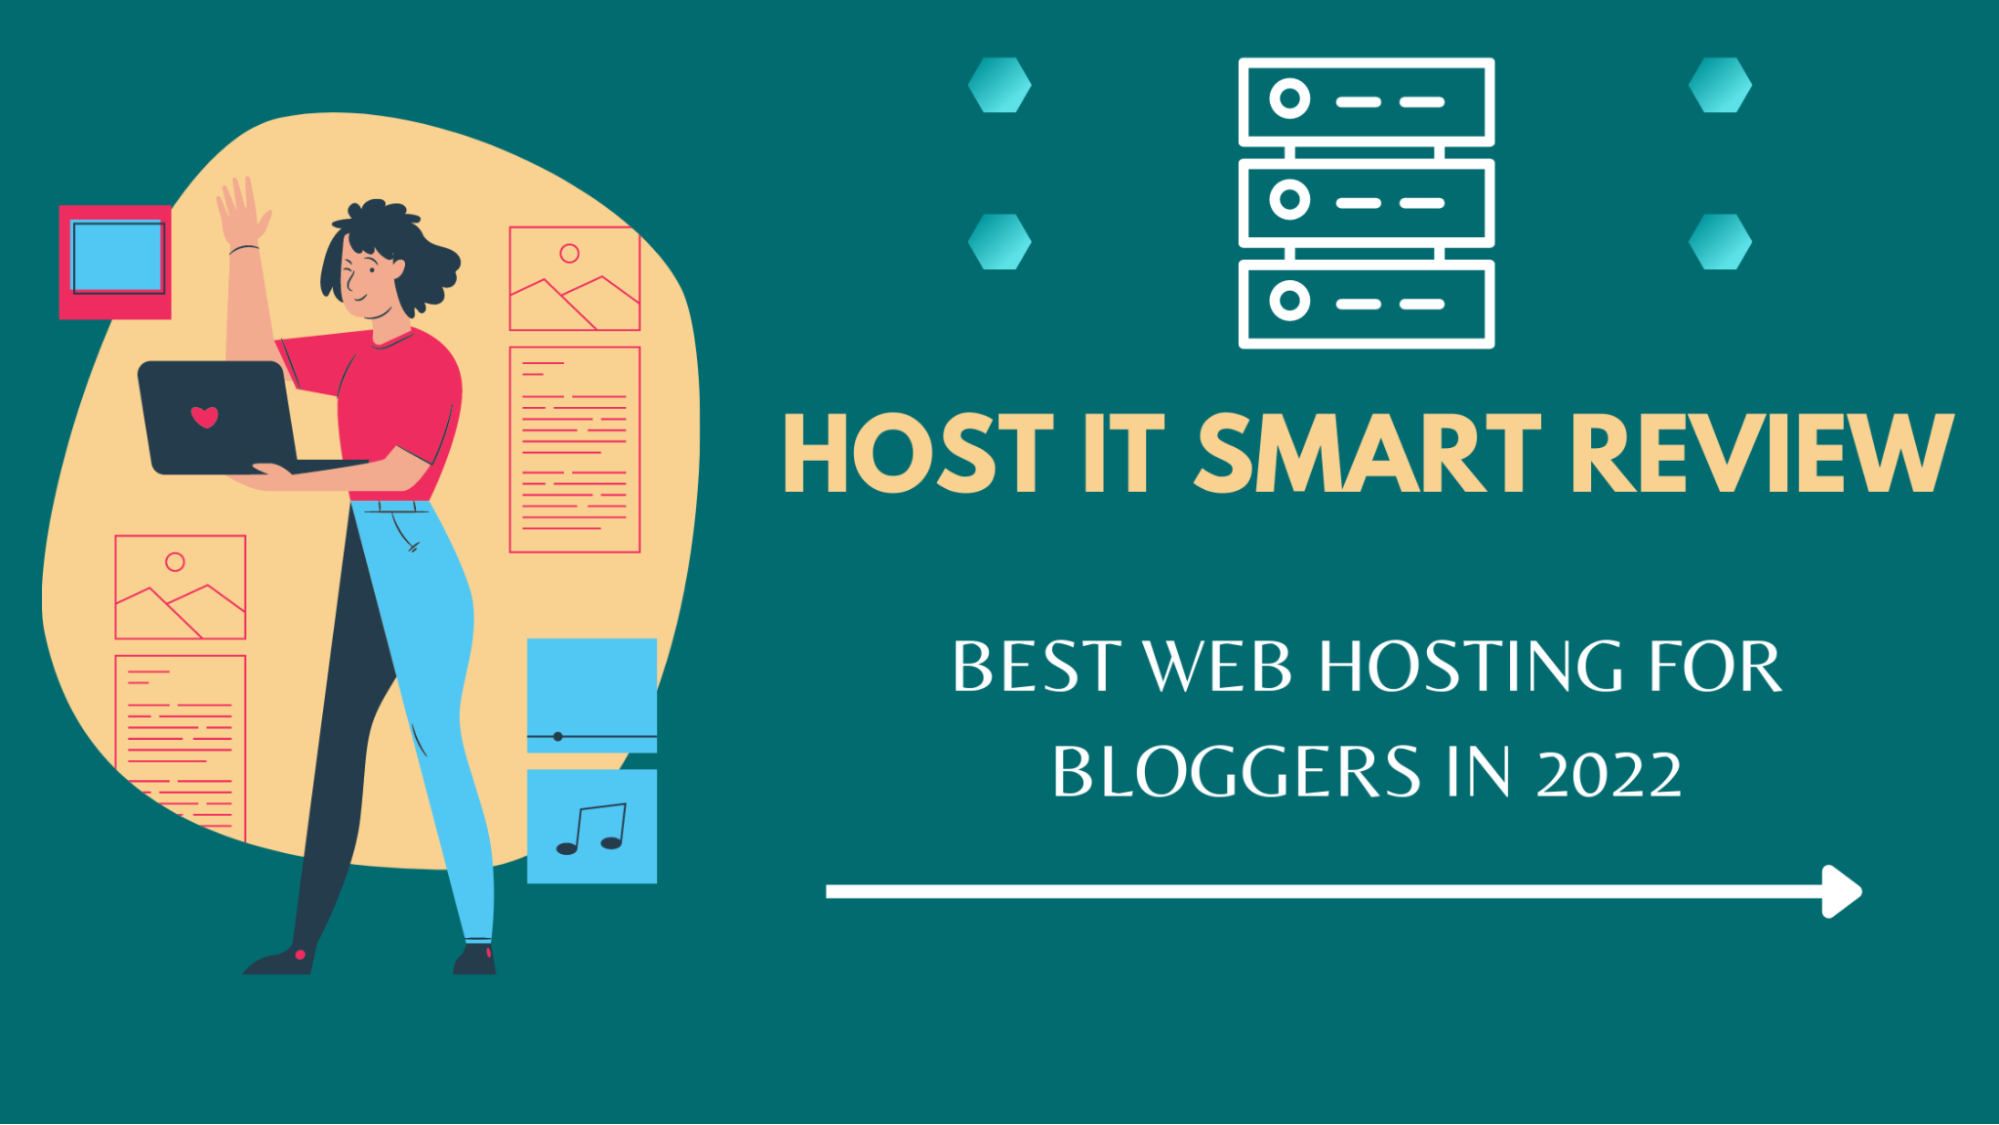 Host IT Smart Review - Best Web Hosting For Bloggers In 2022